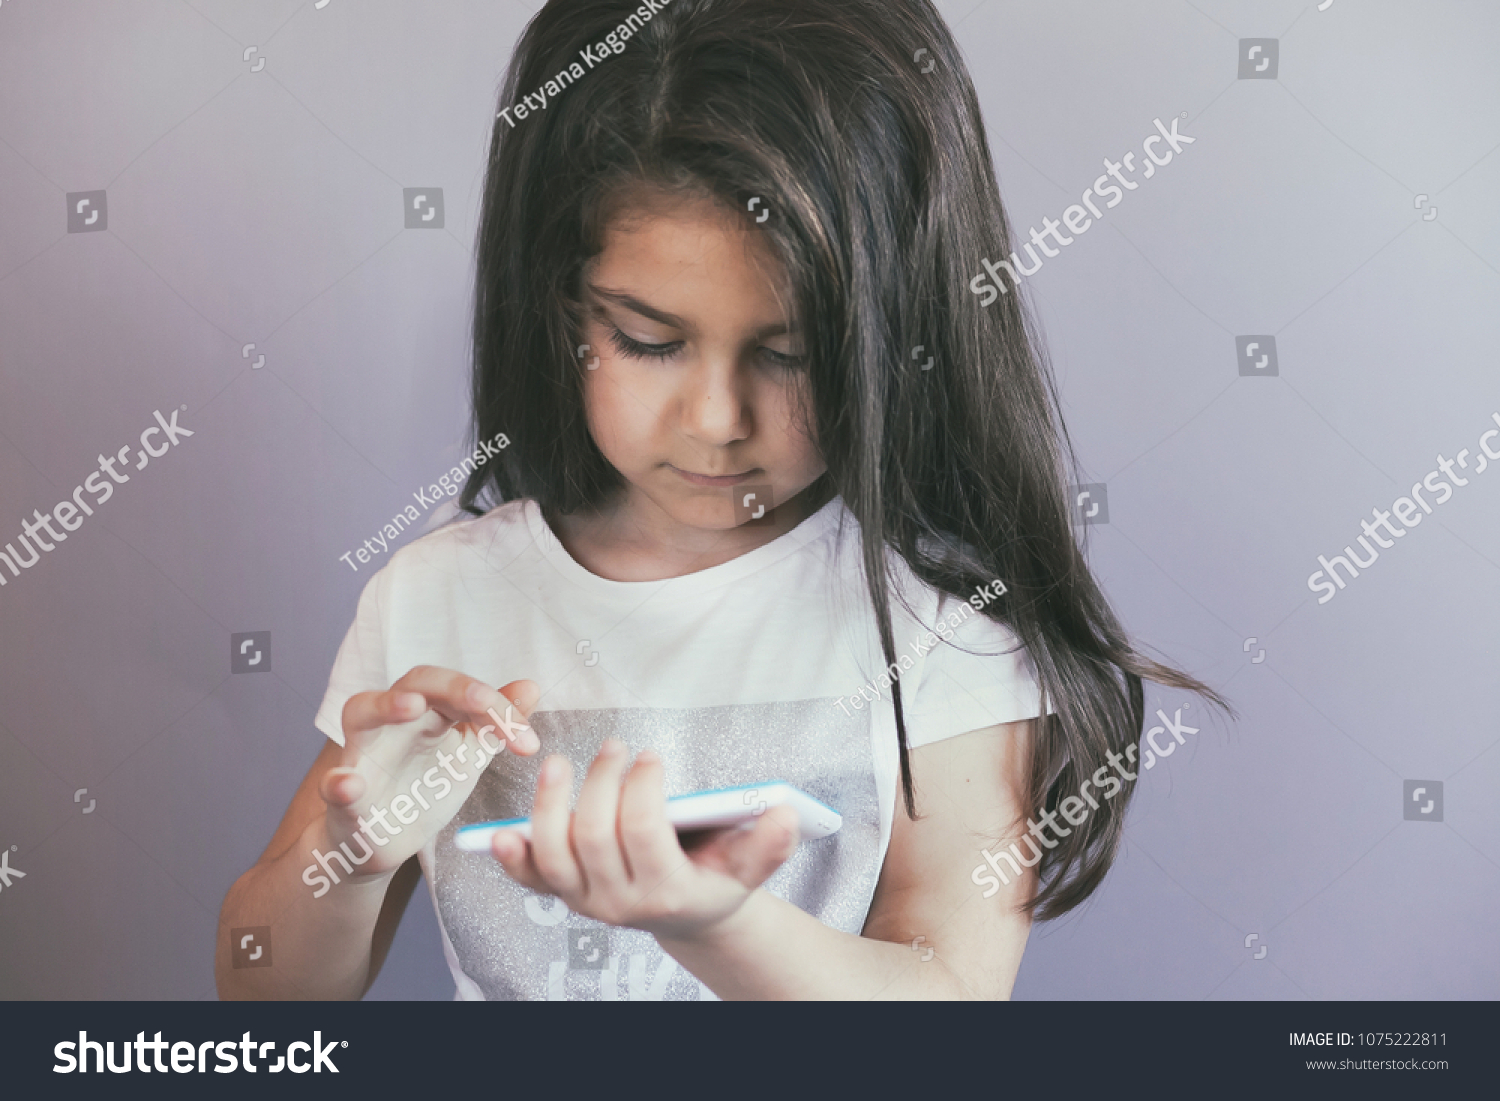 leisure, childhood, technology and people concept - cute little girl child with gadget. Toned image. #1075222811